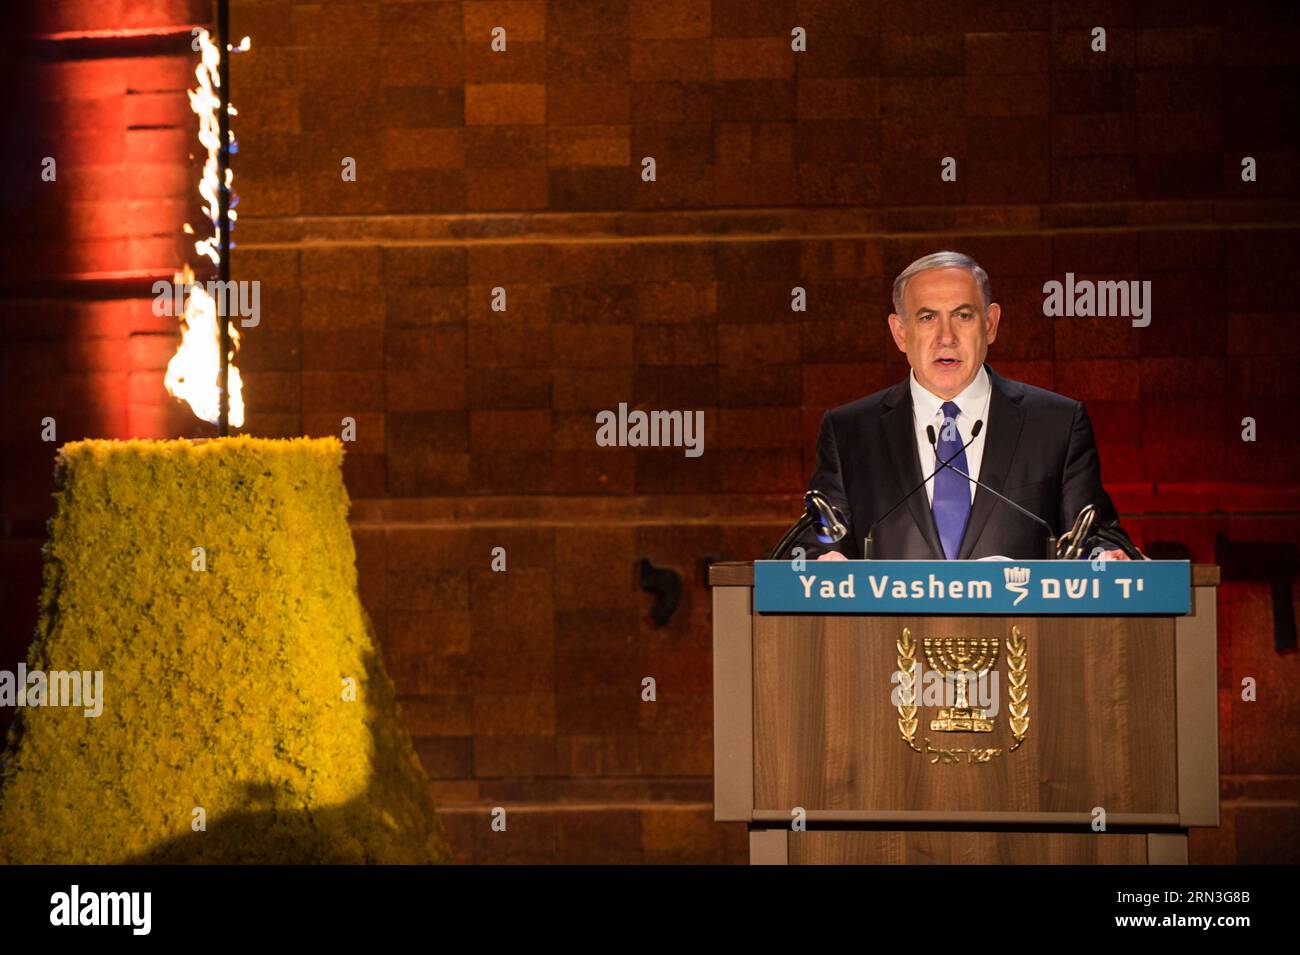 (150415) -- JERUSALEM, April 15, 2015 -- Israeli Prime Minister Benjamin Netanyahu addresses an annual ceremony marking Holocaust Remembrance Day at the Yad Vashem Holocaust Memorial Museum in Jerusalem, on April 15, 2015. Israel marked its annual Holocaust Remembrance day with an official ceremony held in Jerusalem late on Wednesday. Six Holocaust survivors, each representing one million of the six million Jews killed in the holocaust, lighted six torches at the ceremony in Jerusalem s Yad Vashem Holocaust Memorial Museum. From Wednesday sunset to Thursday, Israel will officially commemorate Stock Photo